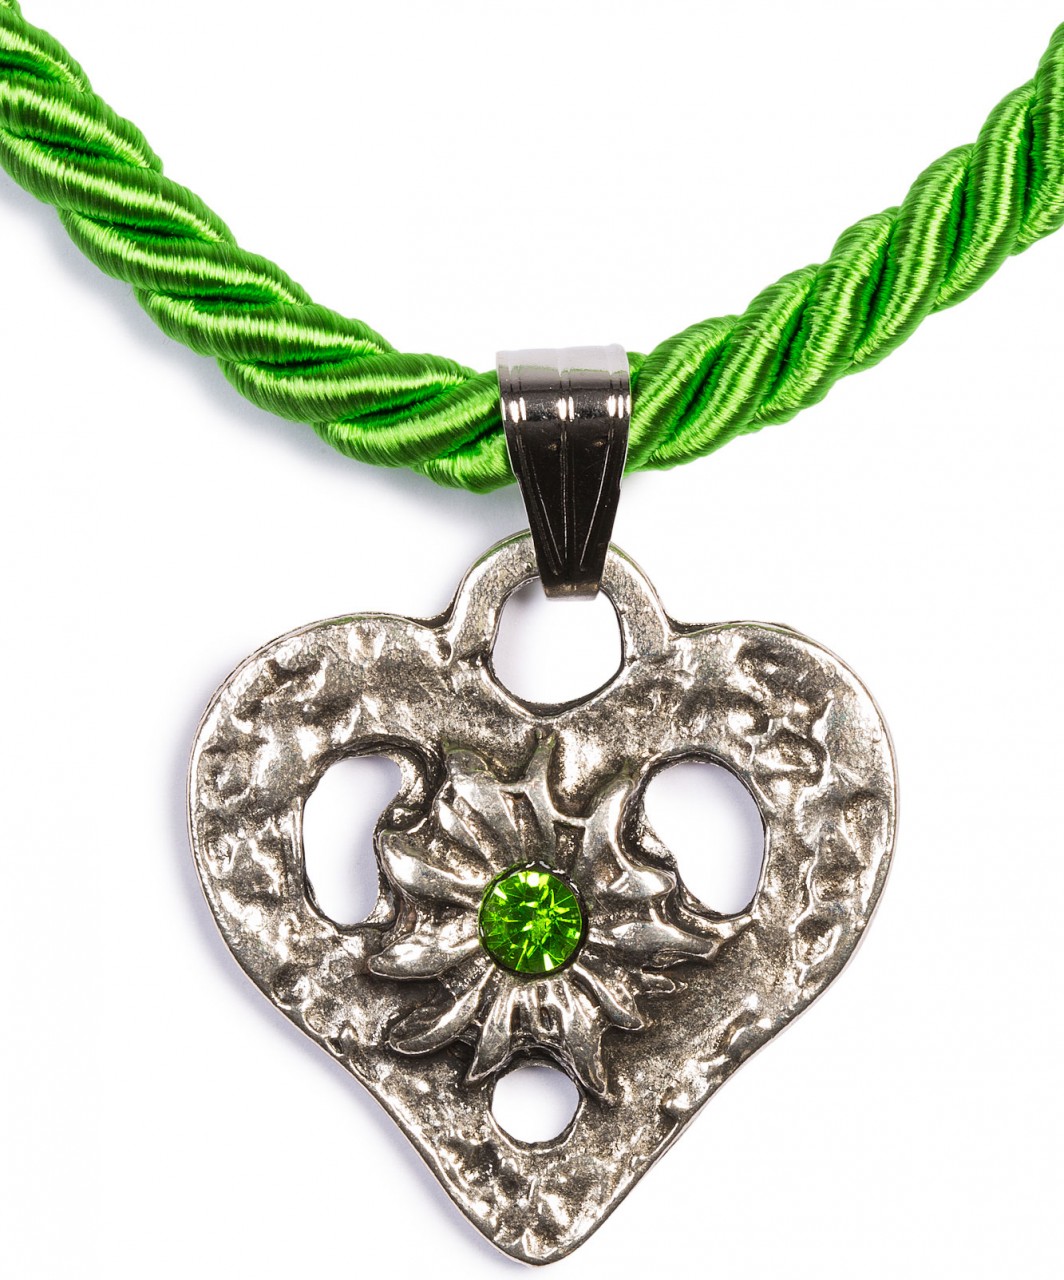 Braid Necklace with Heart Pendant, Apple Green